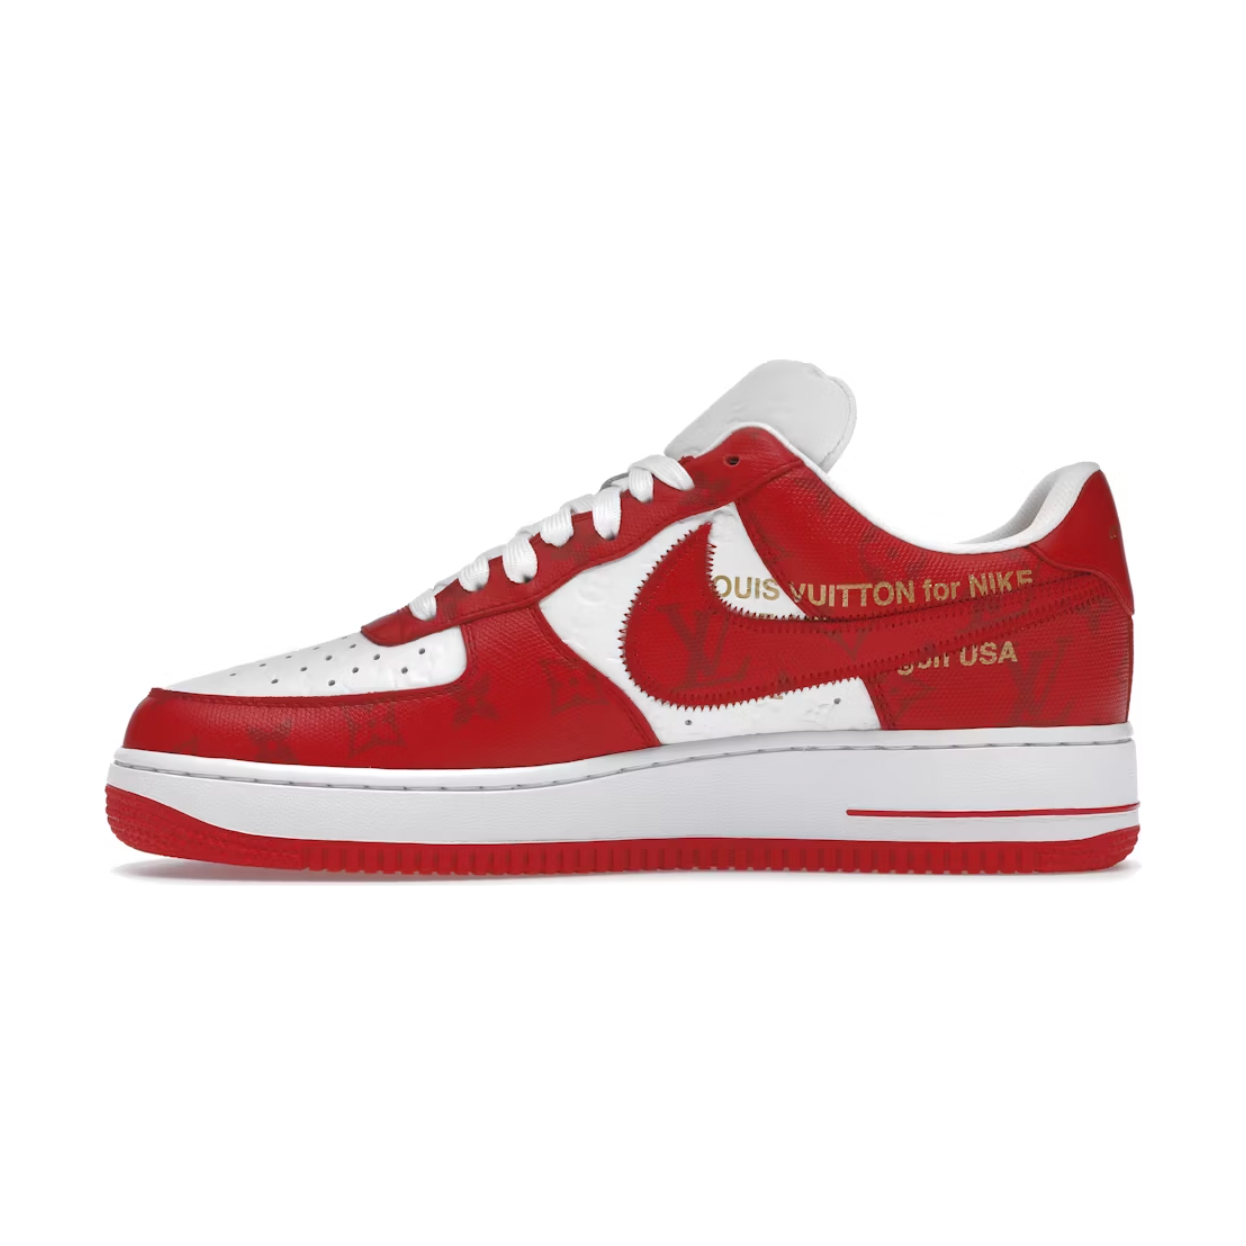 Louis Vuitton Nike Air Force 1 Low By Virgil Abloh White Red by Louis Vuitton from £5500.00